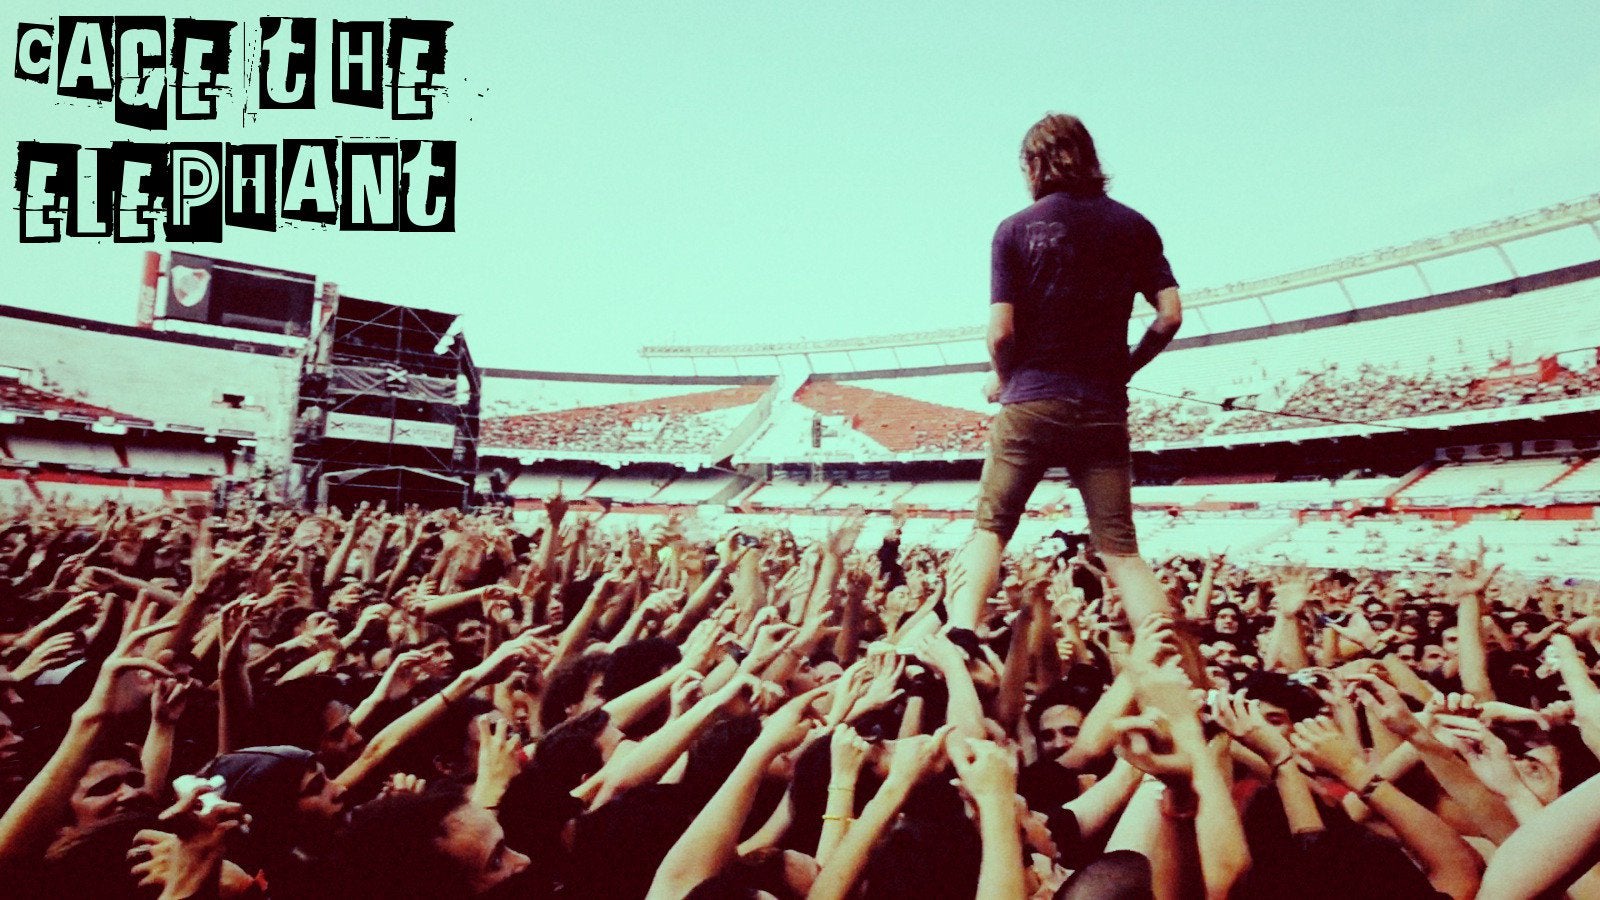 Any cage the elephant fans x rwallpapers